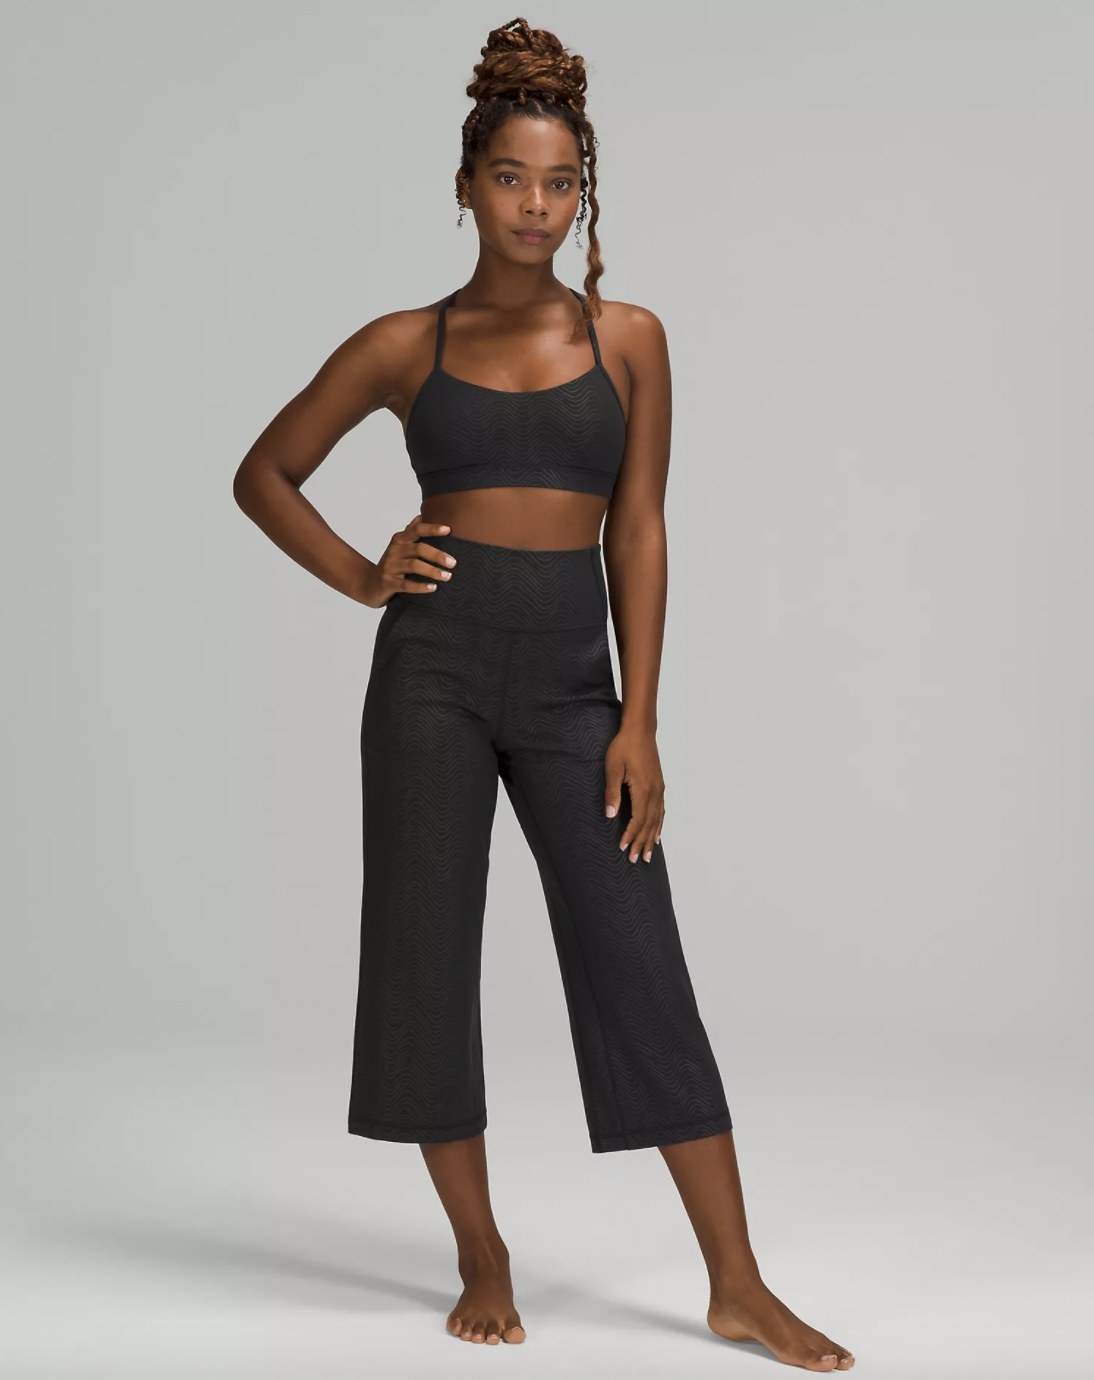 A woman wearing a black sports bra and cropped pants